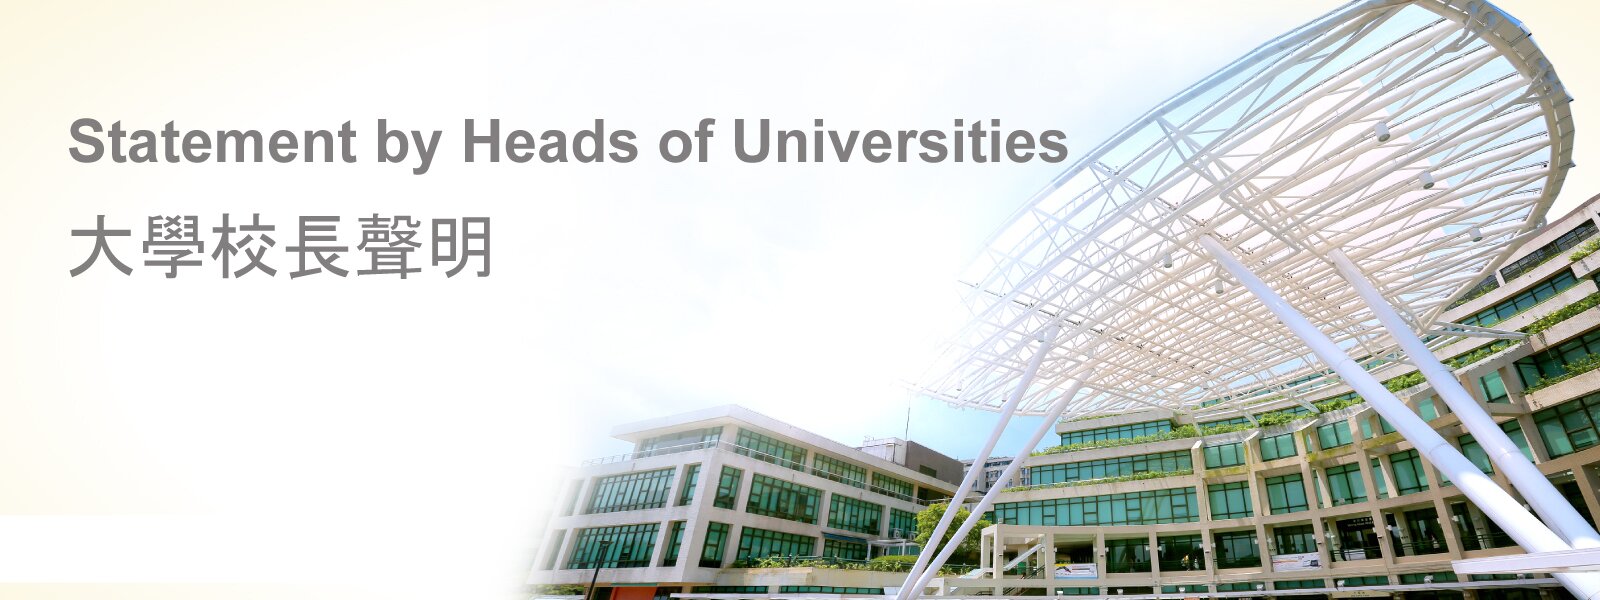 Statement by Heads of Universities